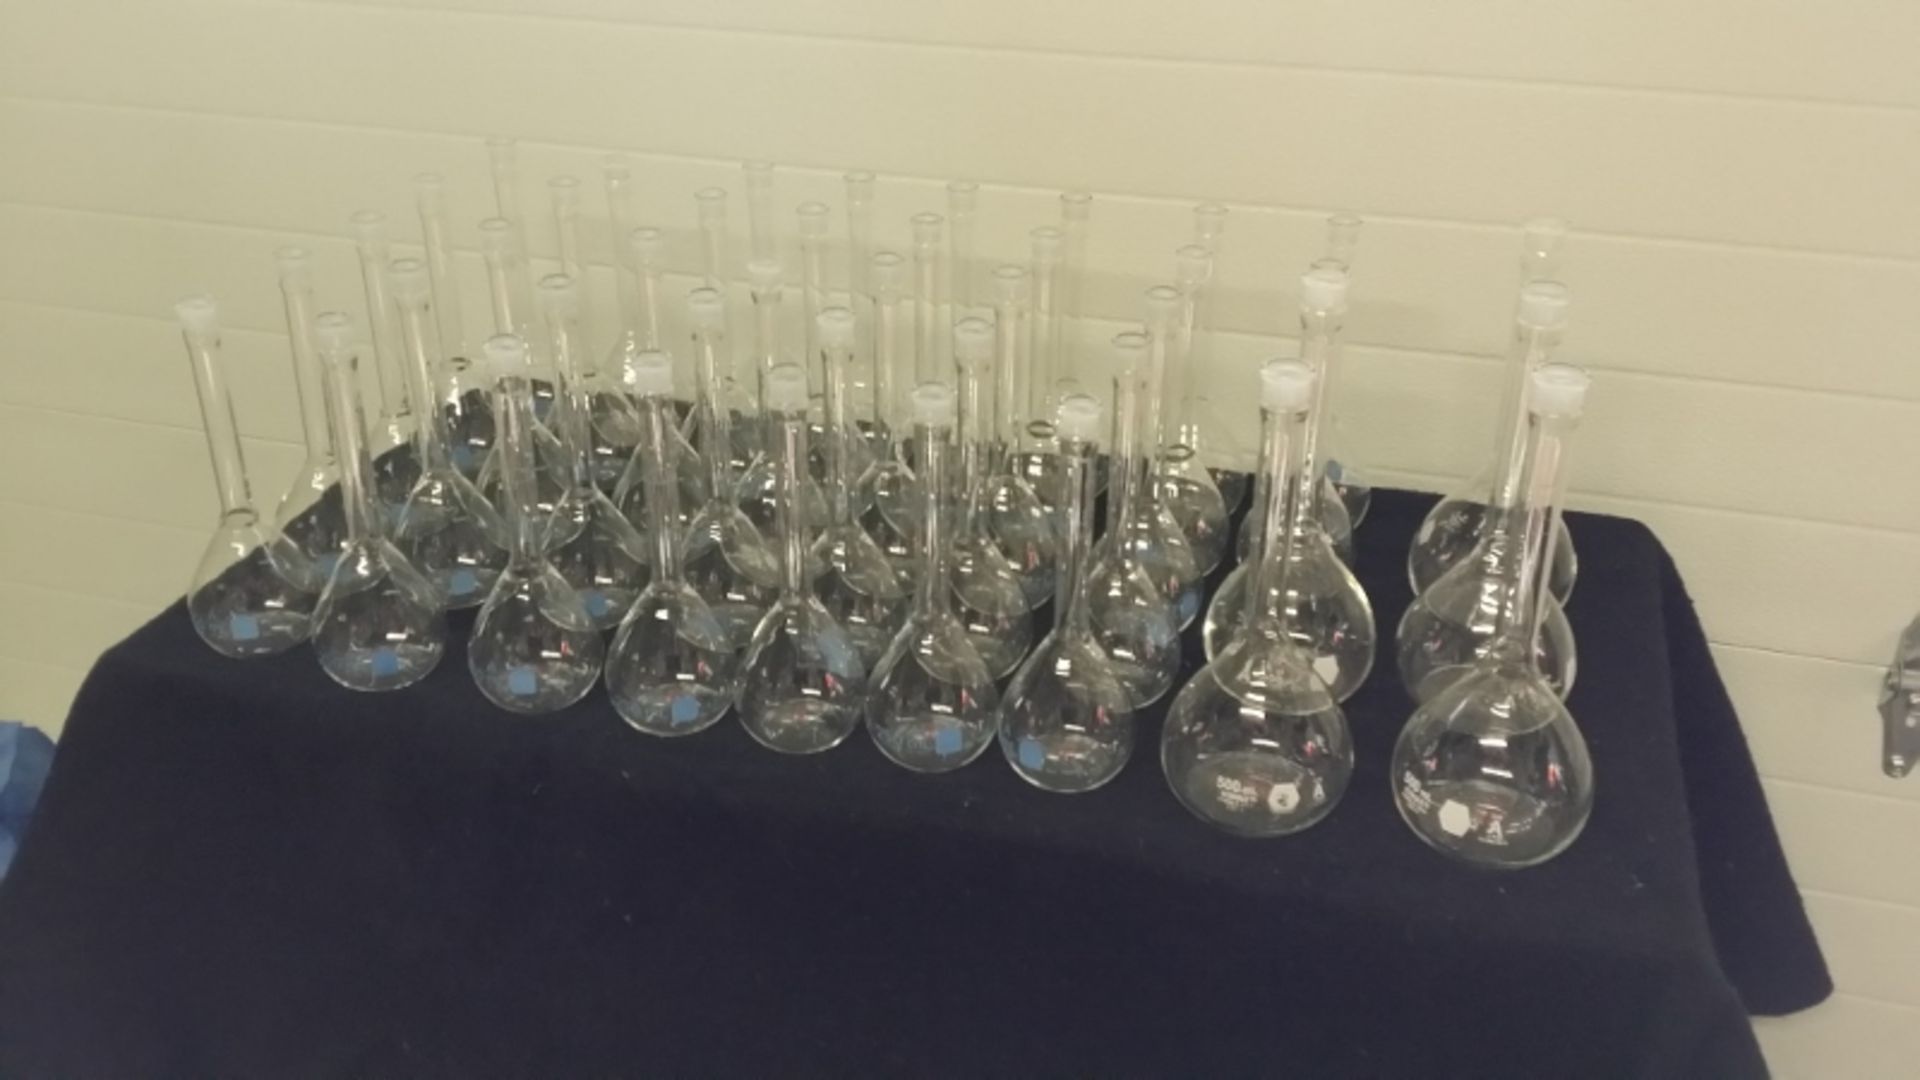 Miscellaneous Glassware and components. load out $50